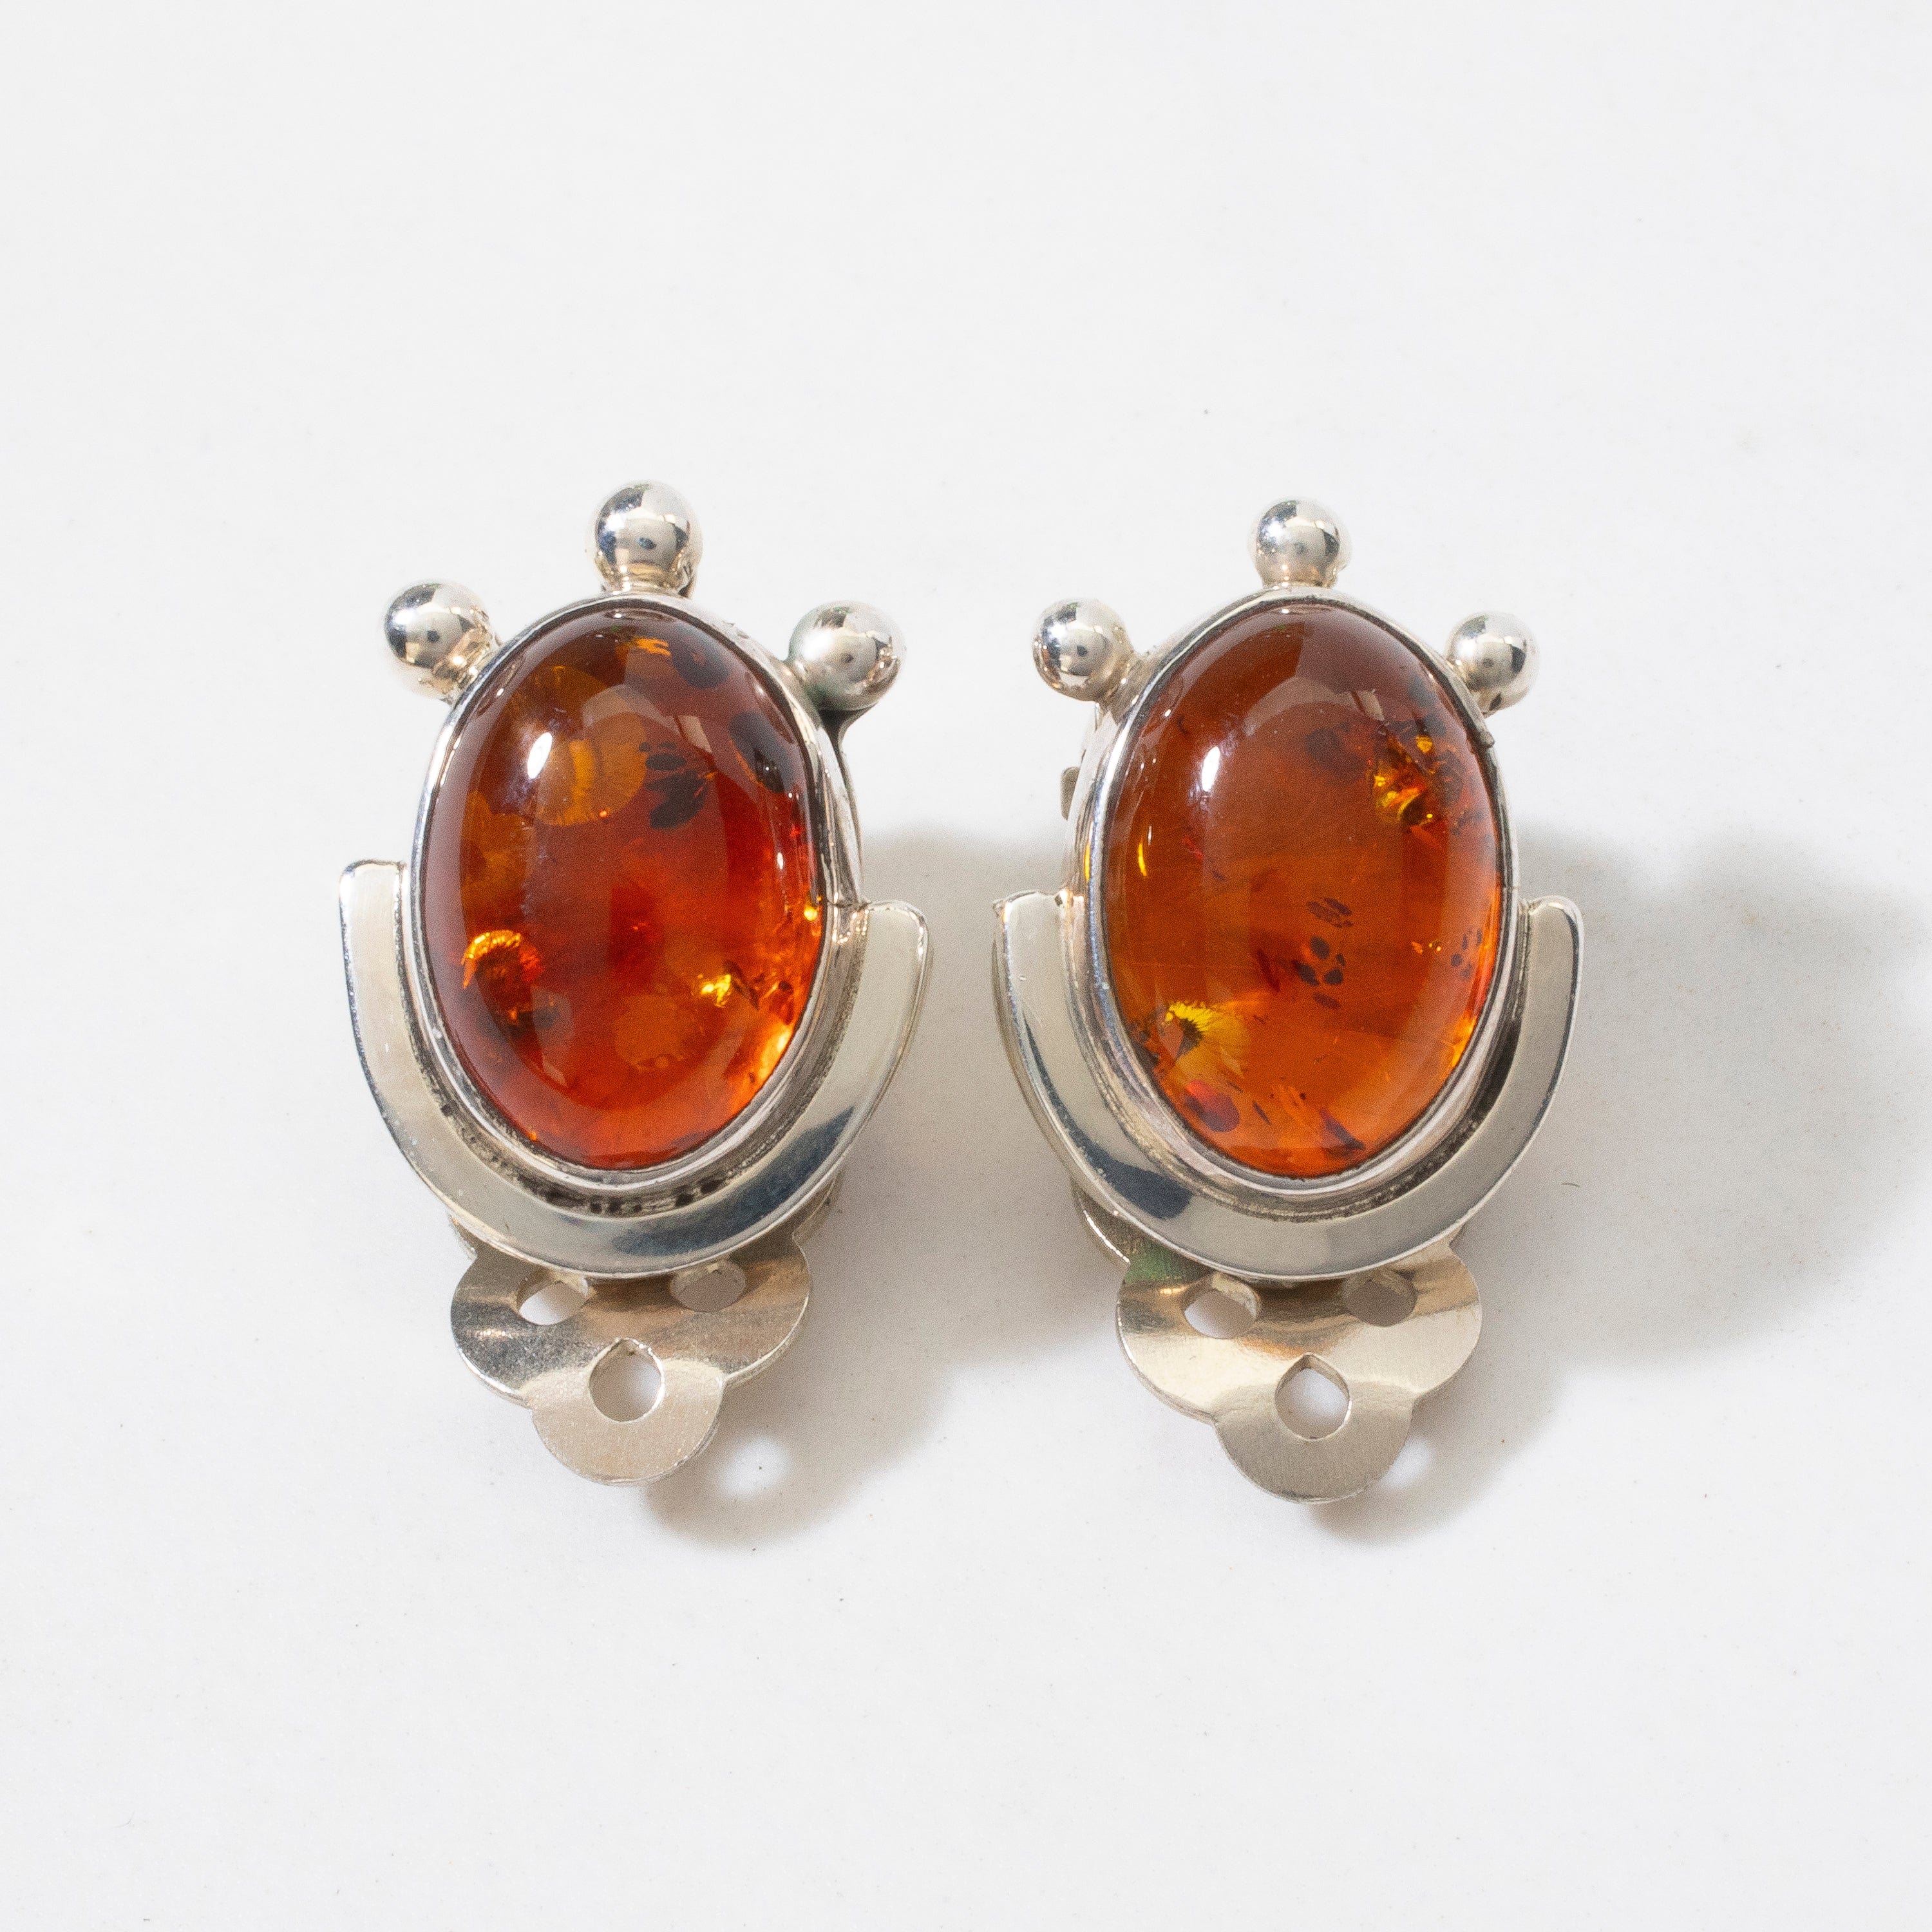 Kalifano Native American Jewelry Baltic Amber Oval USA Native American Made 925 Sterling Silver Earrings with Stud Backing NAE250.010